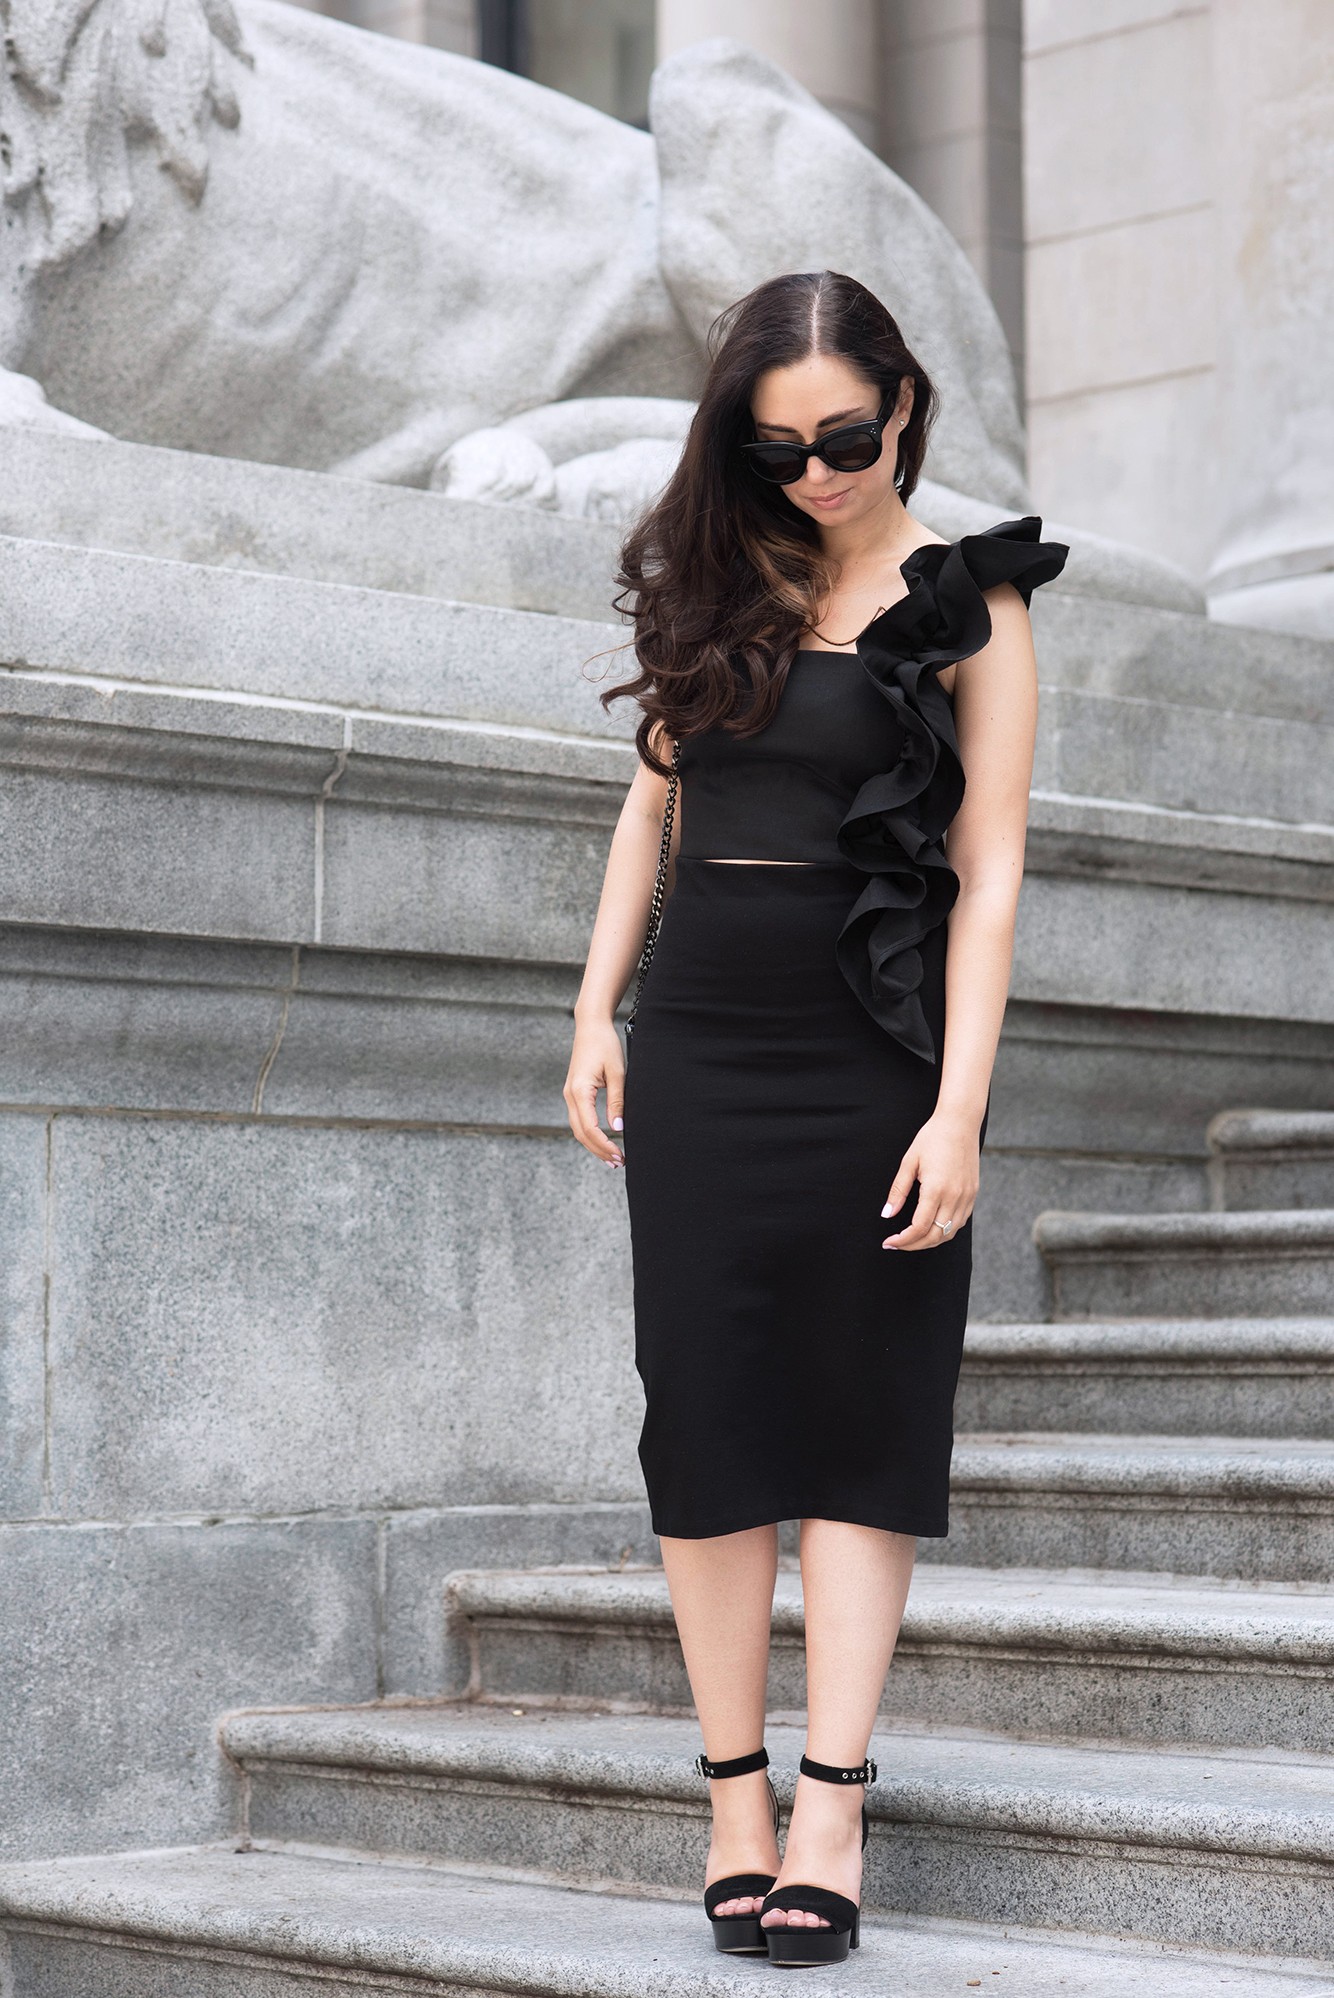 coco-and-vera-best-vancouver-fashion-blog-best-canadian-fashion-blog-top-blogger-circus-royalty-blouse-le-chateau-midi-skirt-raye-sandals-celine-baby-audrey-sunglasses copy copy